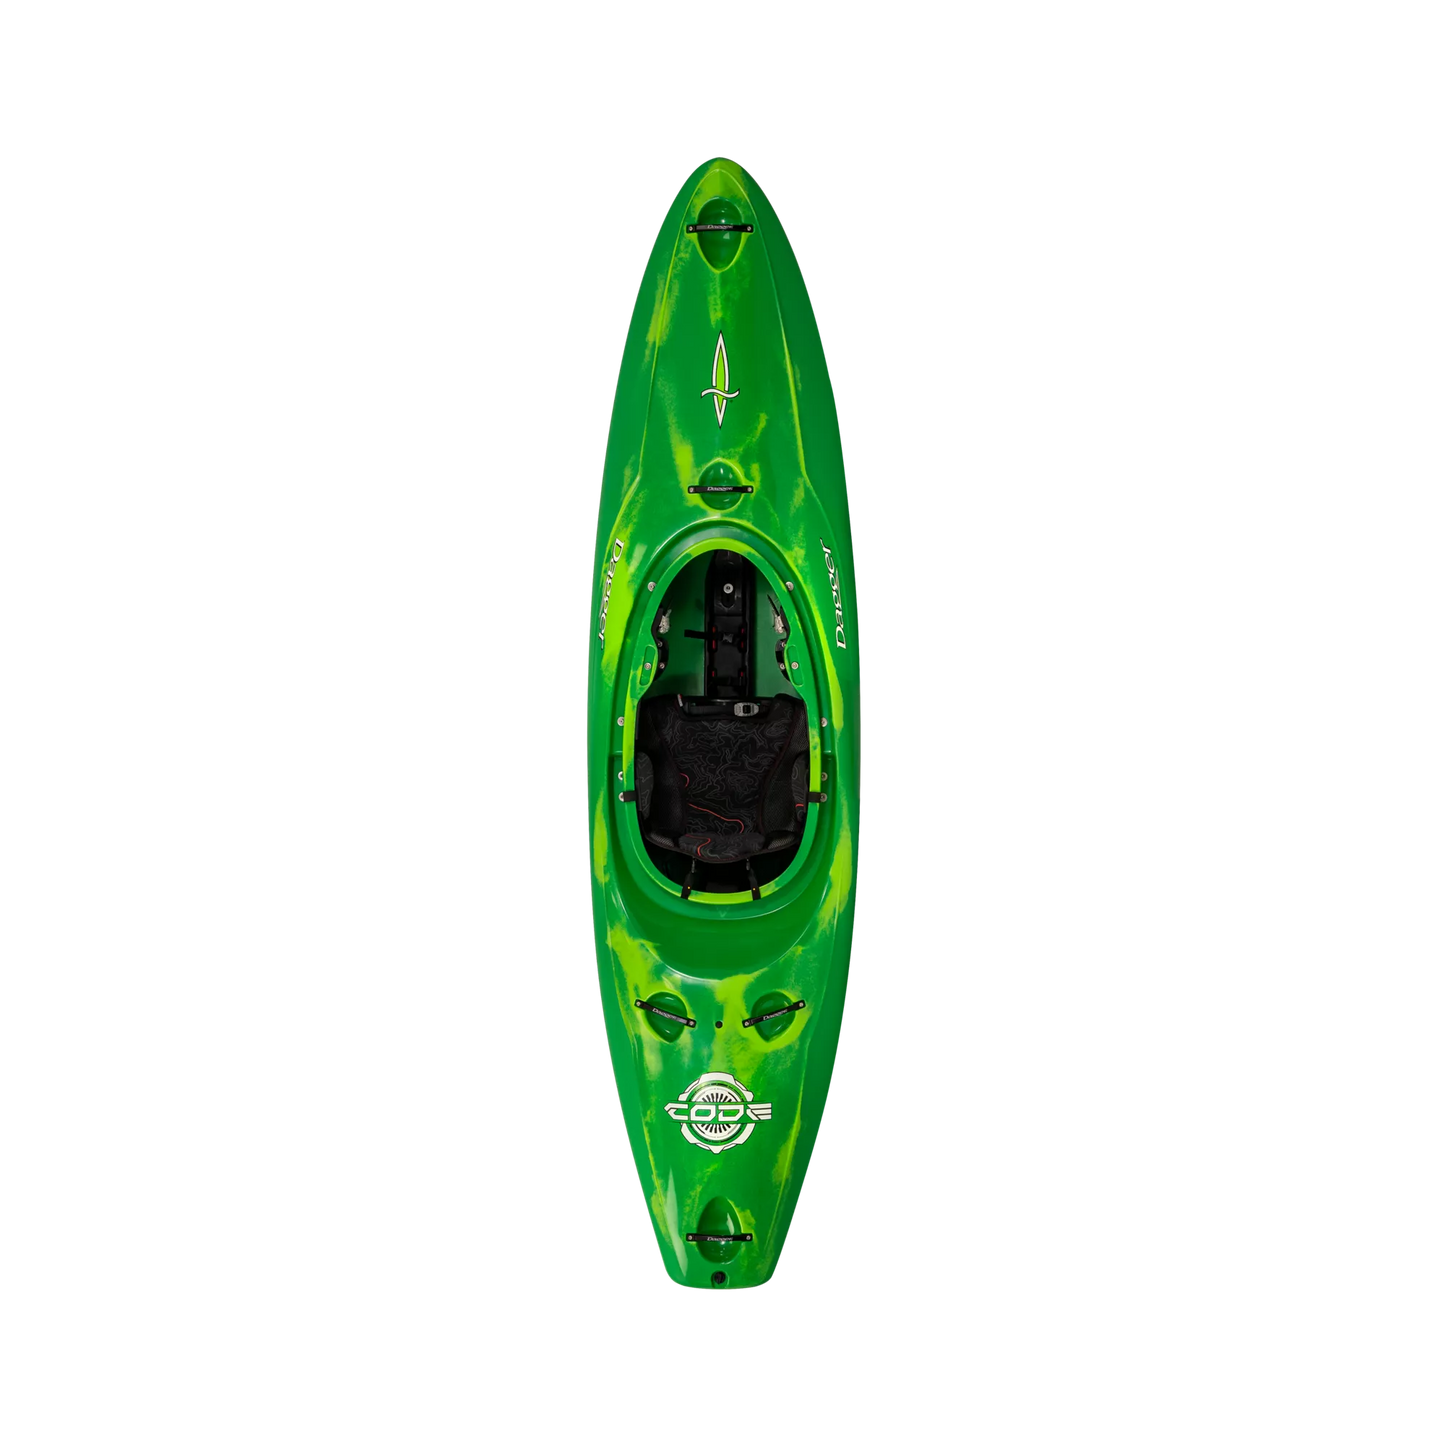 The Green Smoke Dagger Code creek whitewater kayak with new thigh brace system.